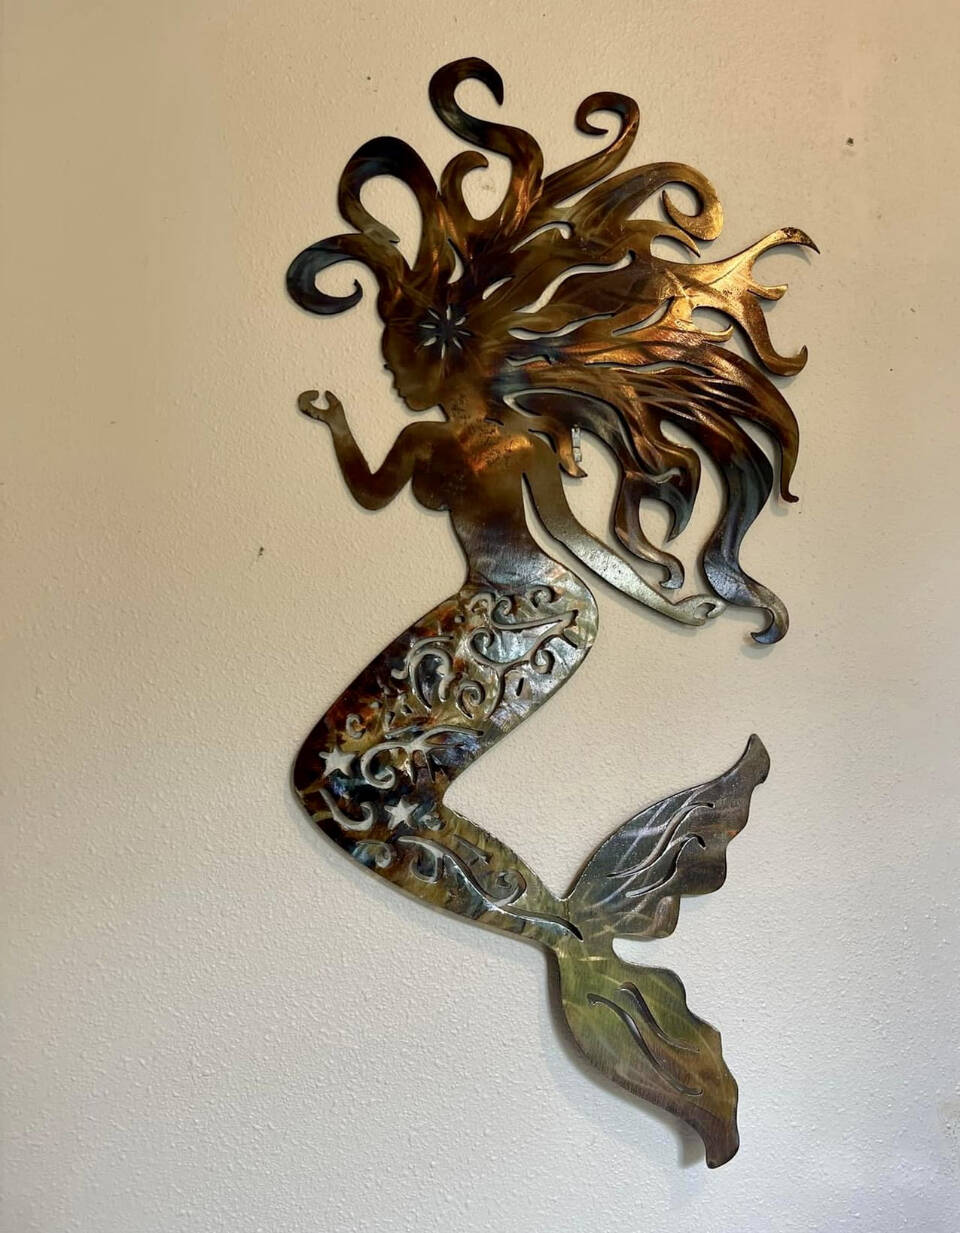 A brushed and heat tempered metal mermaid by Homer artist Ellie DelliGatti is photographed this year. Photo provided by Ellie DelliGatti